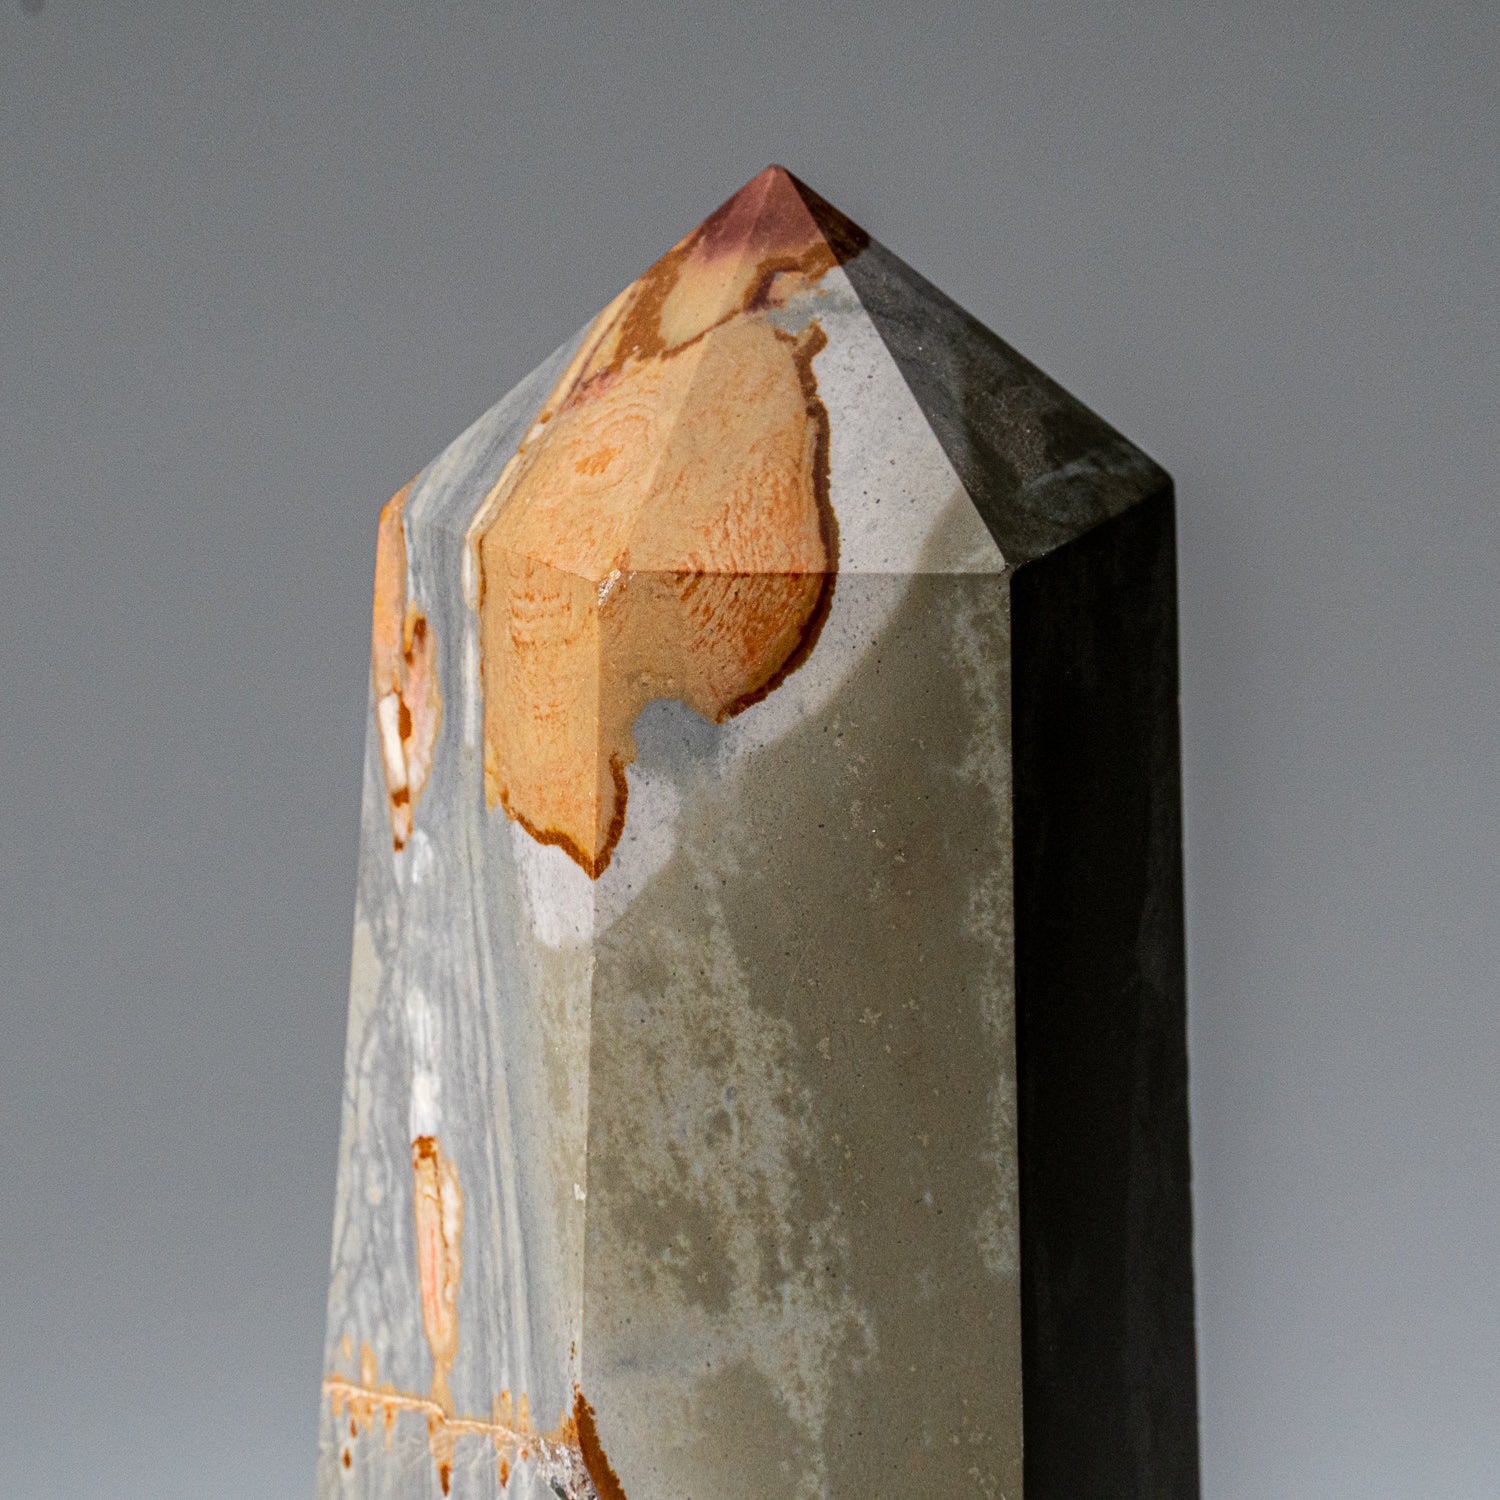 Polished Polychrome Point from Madagascar (1.6 lbs)